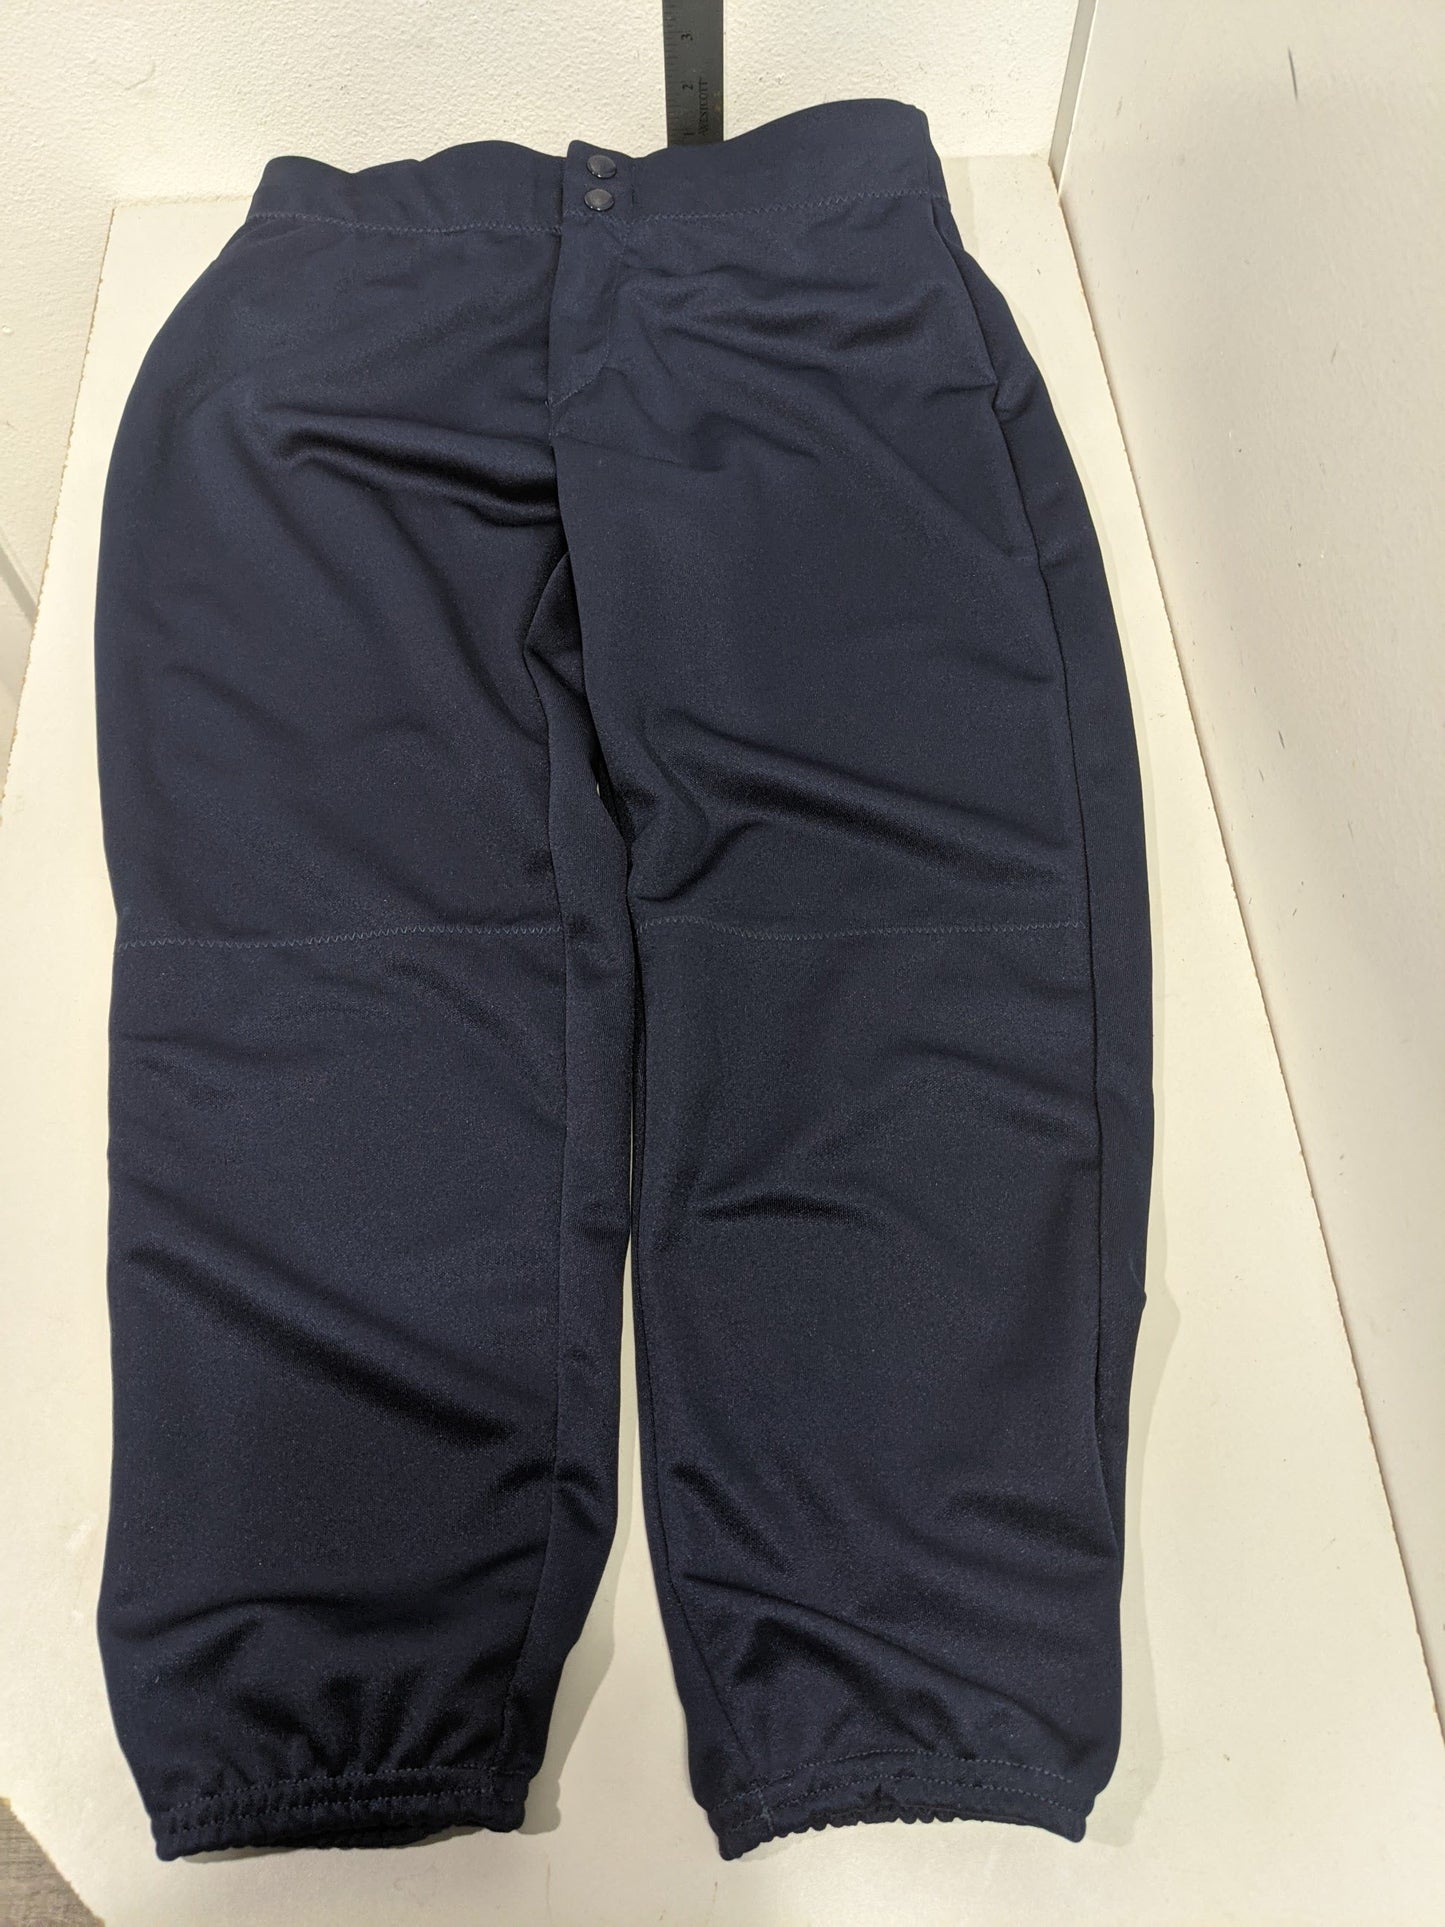 Alleson Baseball Pants Condition Used Size Medium Blue